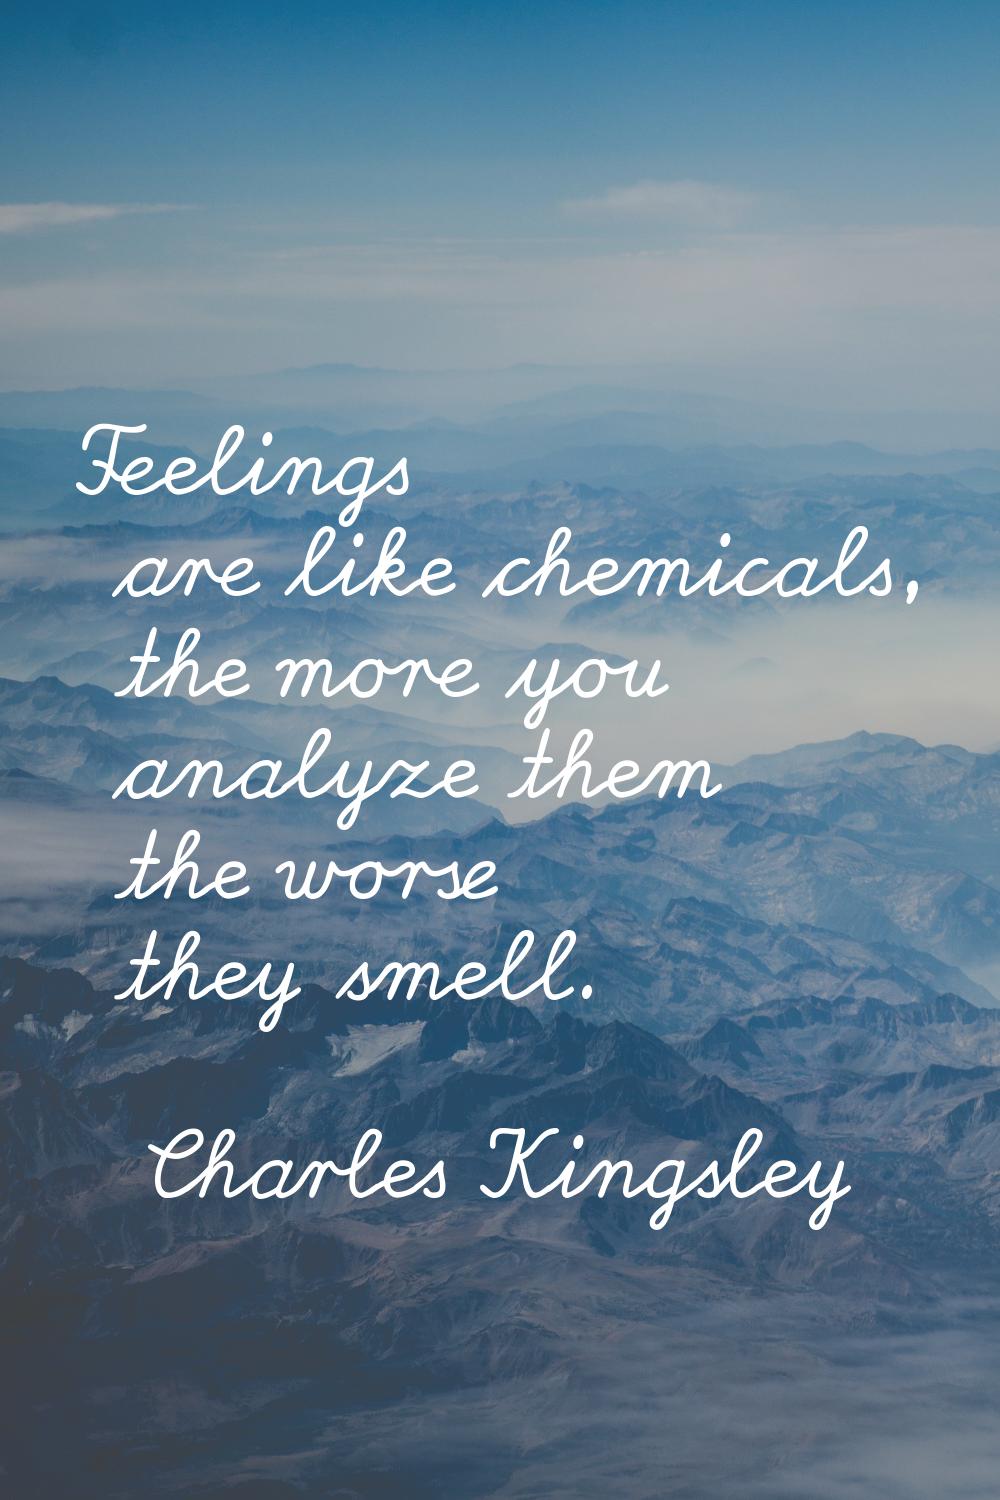 Feelings are like chemicals, the more you analyze them the worse they smell.